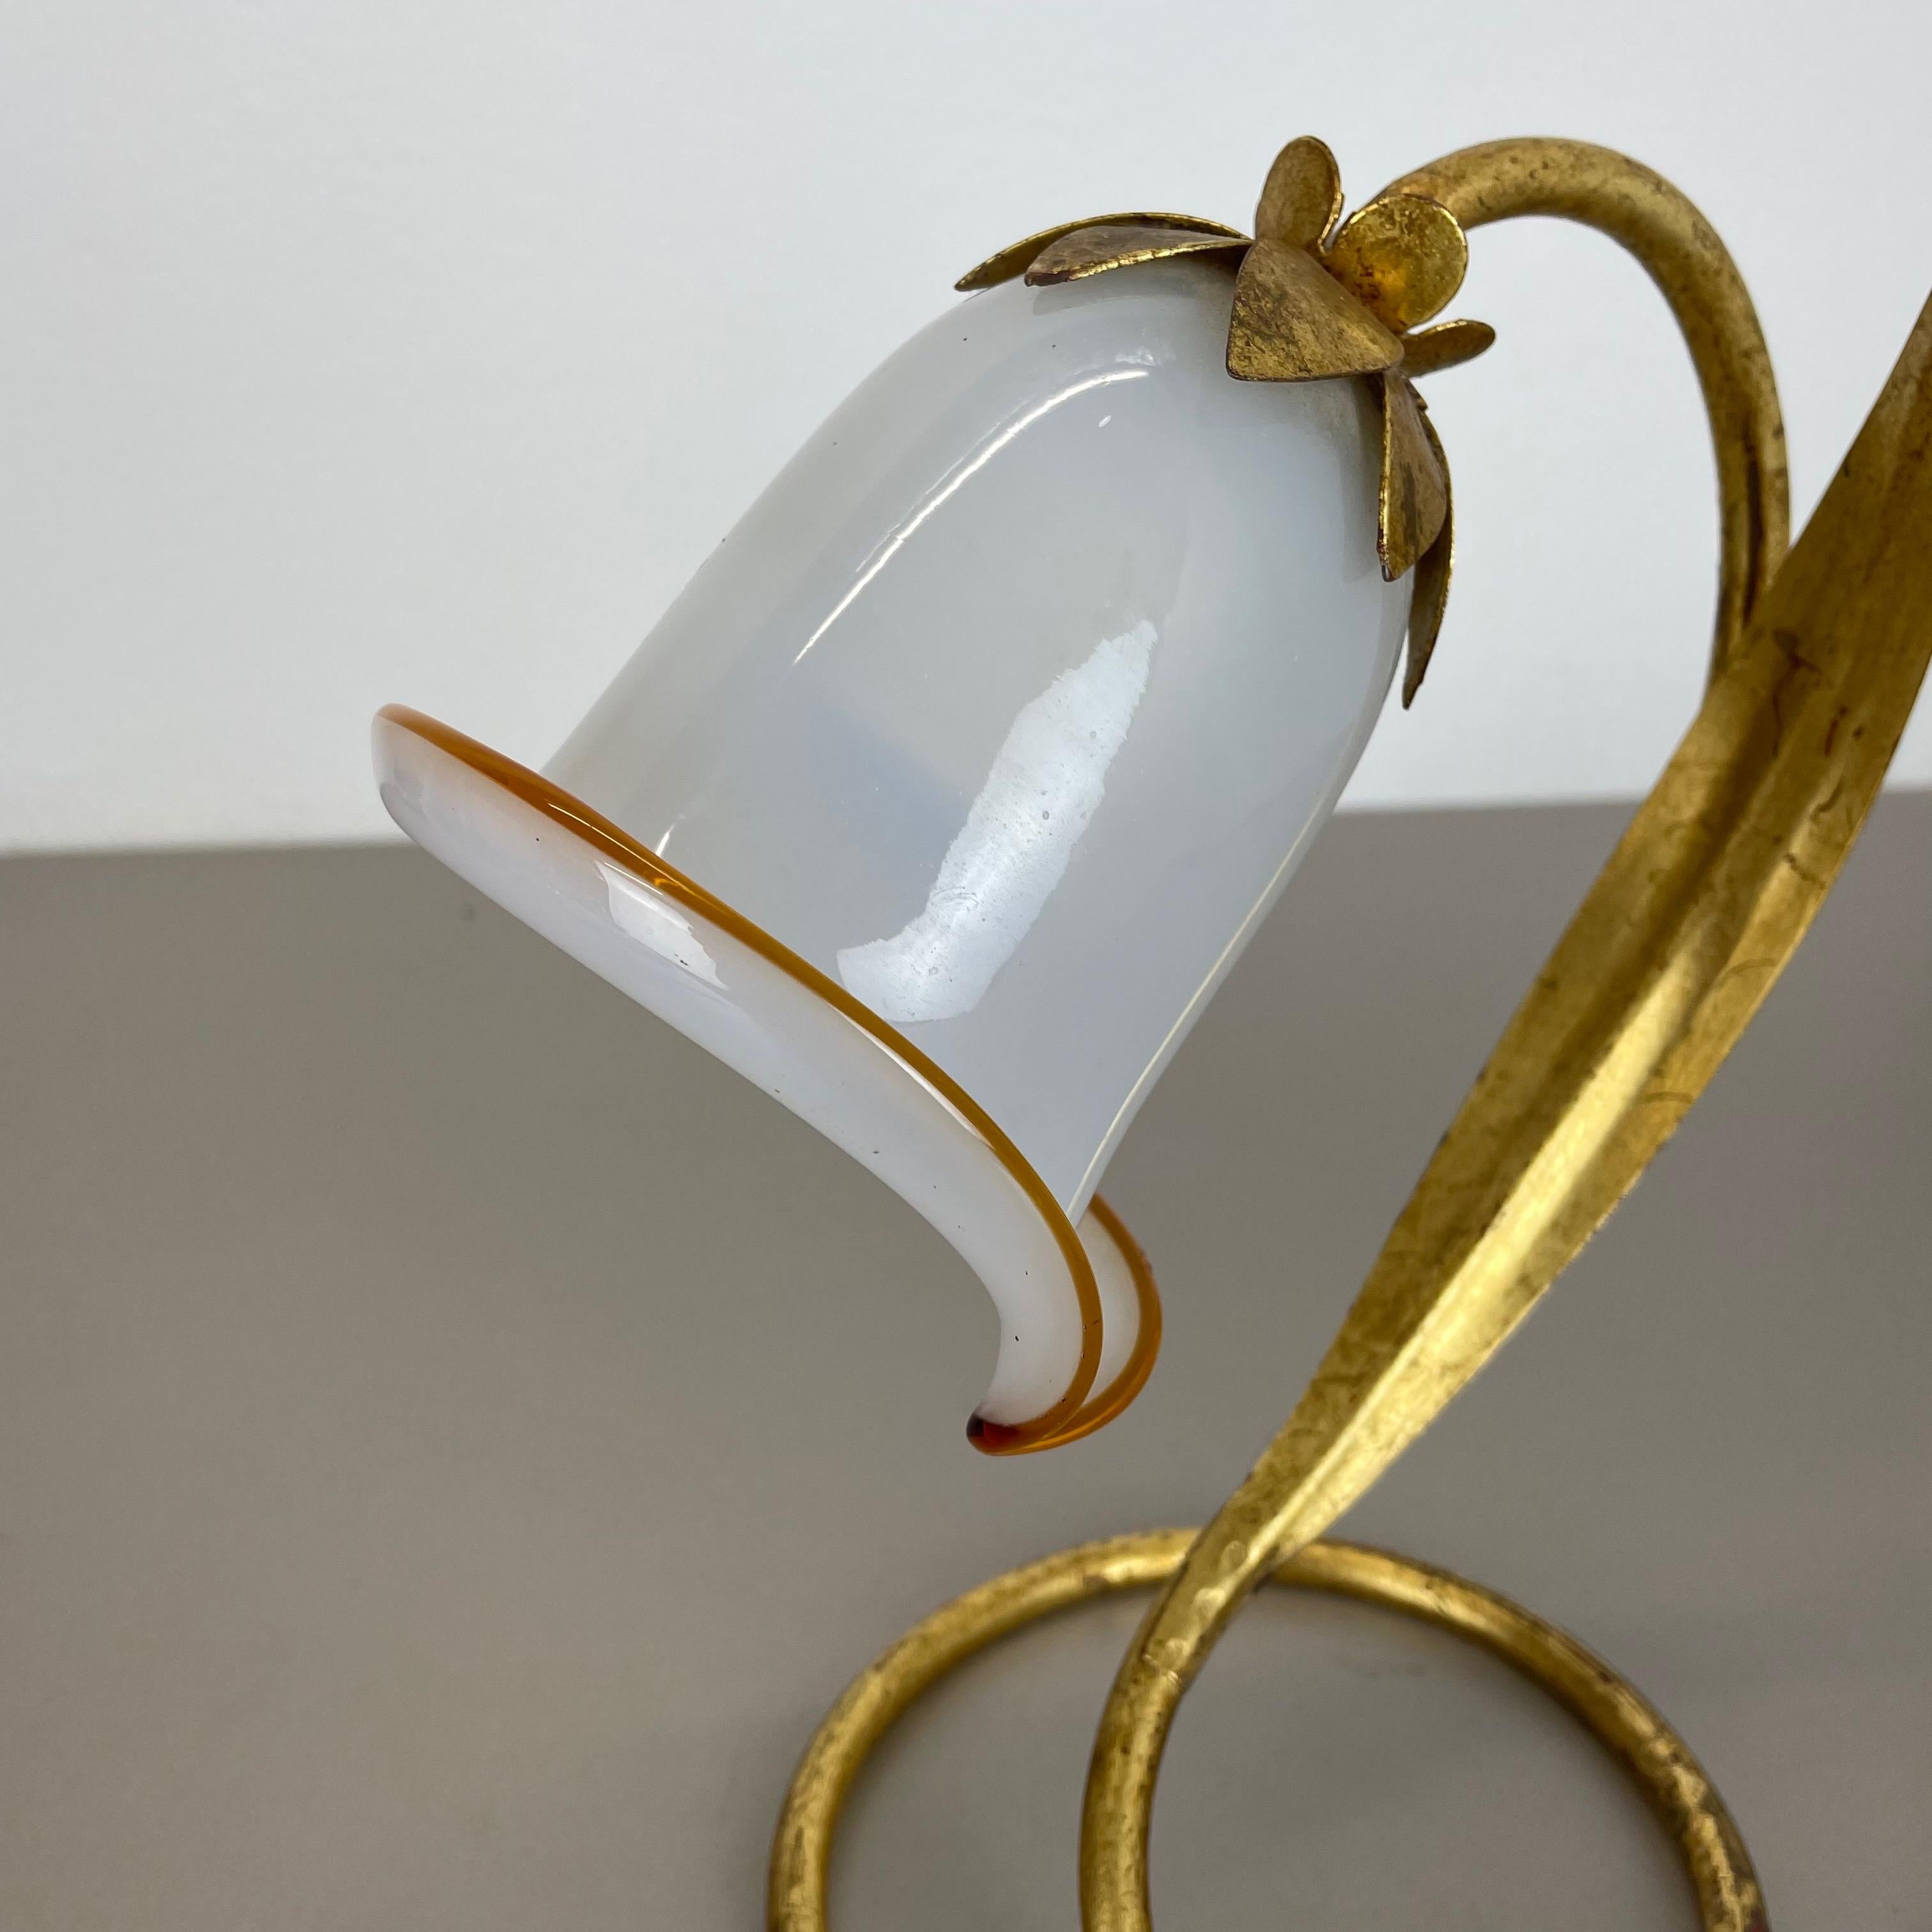 Hans Kogl Style Golden Florentiner Murano Table Light Sconces, Italy, 1970s In Good Condition For Sale In Kirchlengern, DE